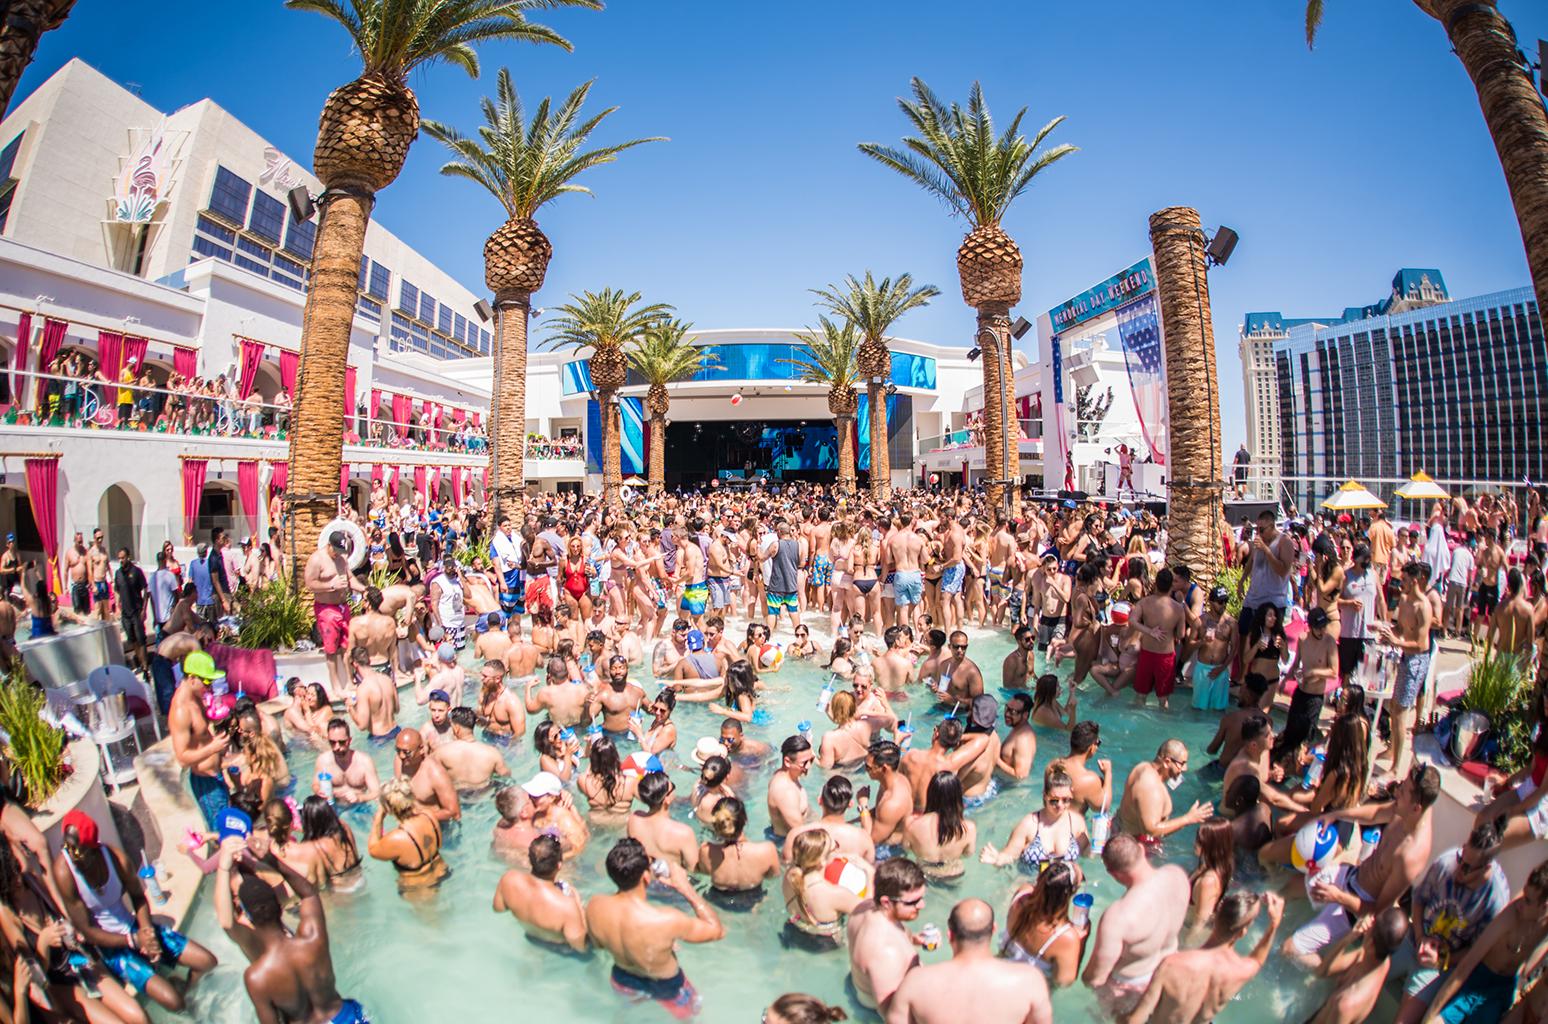 The only rooftop pool party is at Drai’s Beach Club.